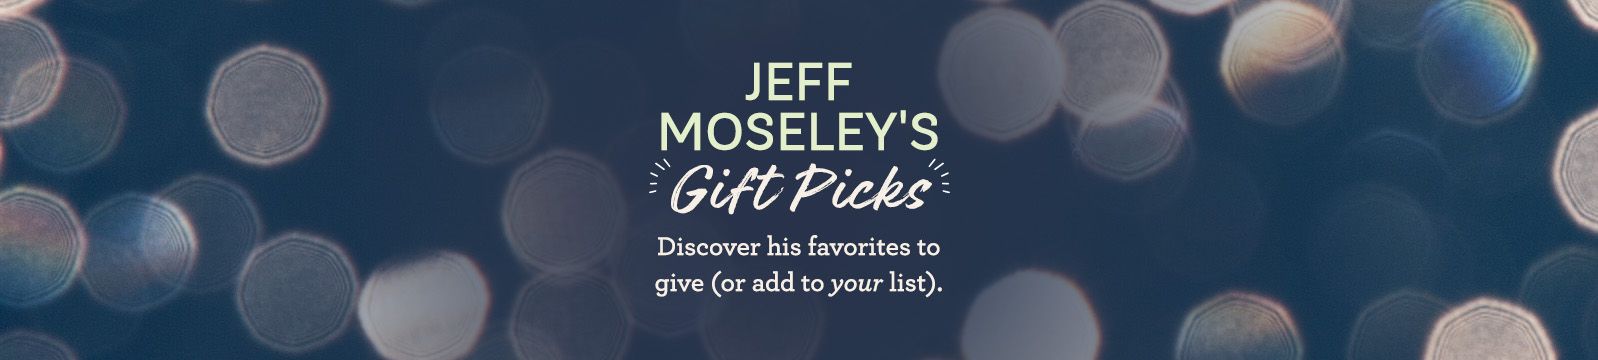 Jeff Moseley's Gift Picks  Discover what he's giving this season (& maybe find something for your list).